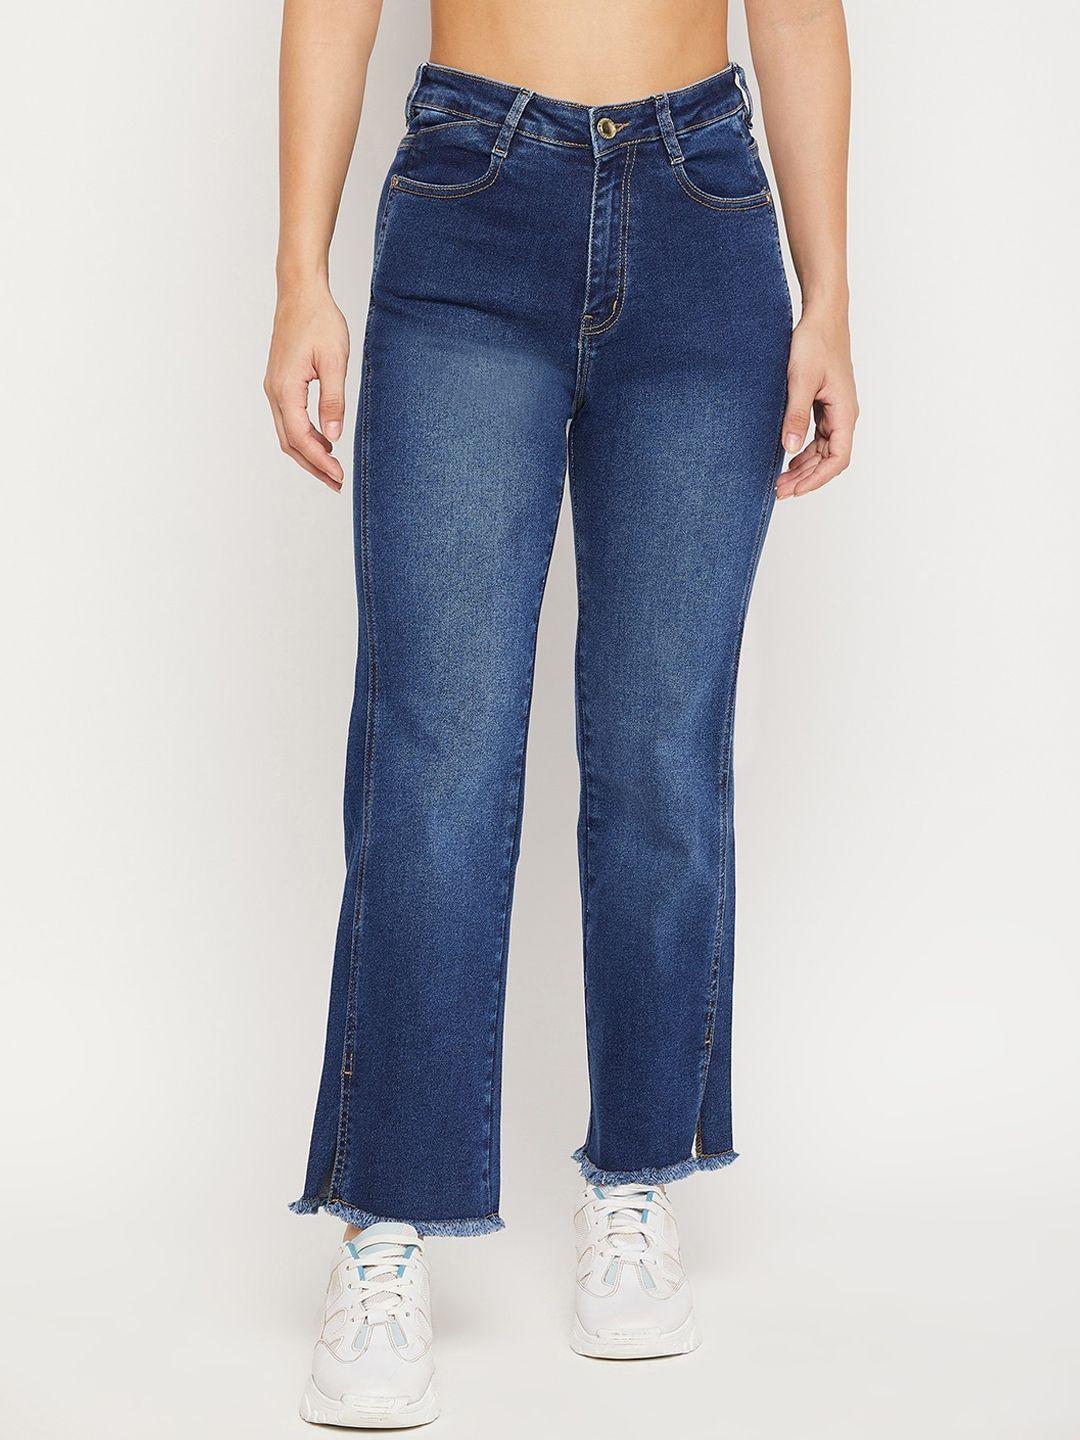 madame women navy blue high-rise heavy fade jeans